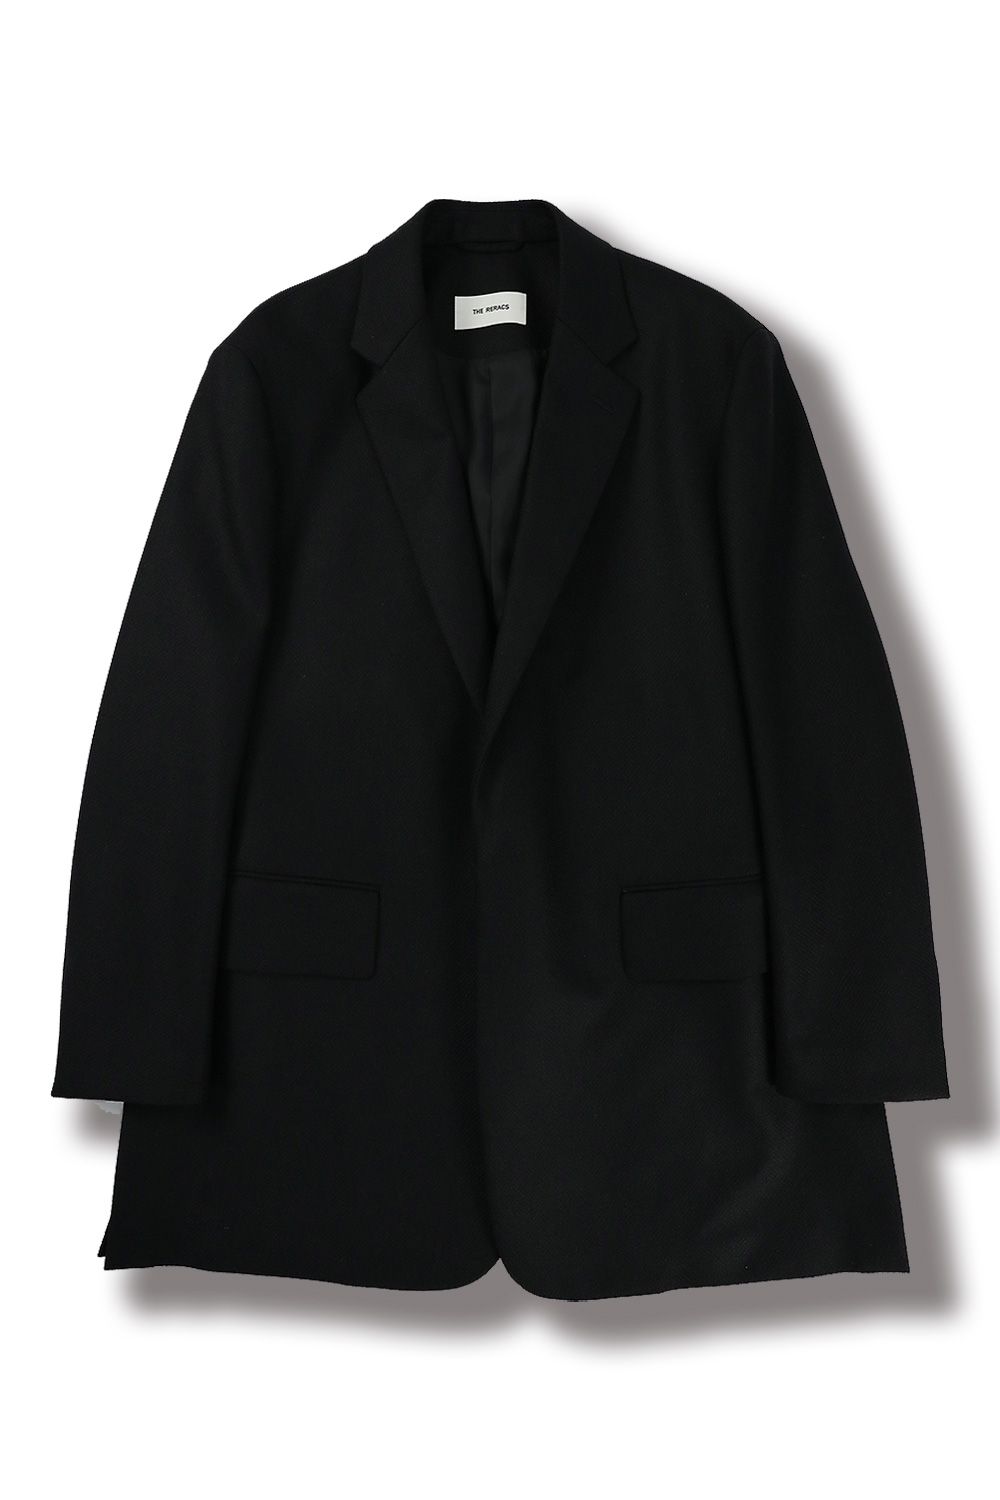 THE RERACS - 【23AW/ラスト1点】THE SINGLE NOTCHED LAPEL JACOAT